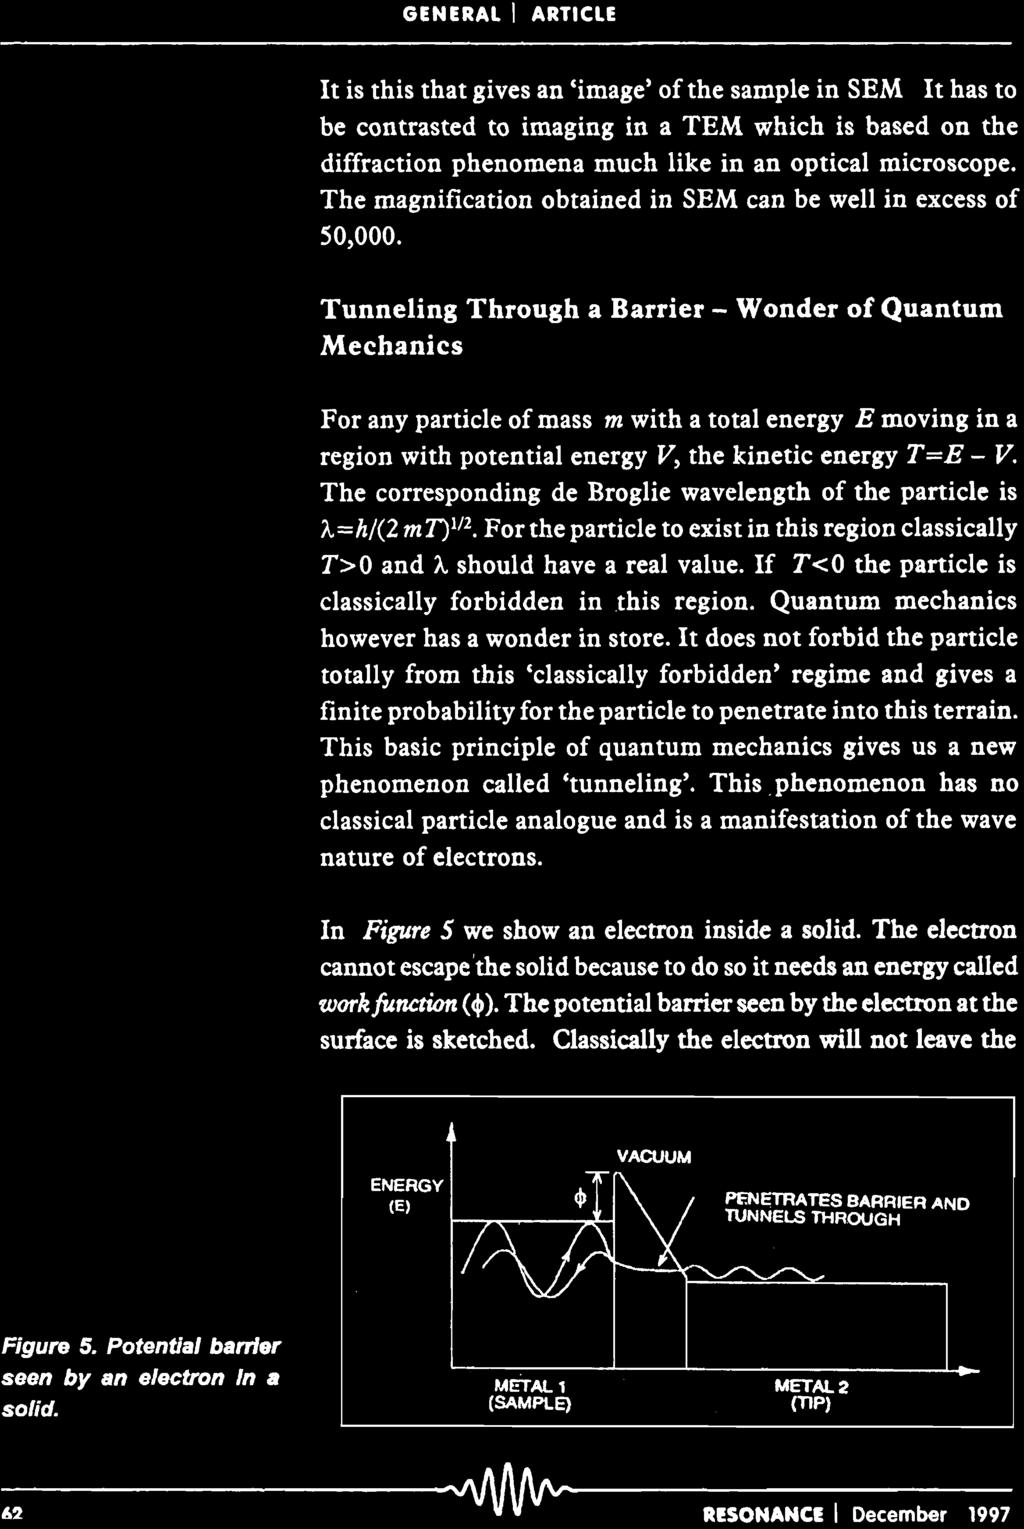 Tunneling Through a Barrier - Wonder of Quantum Mechanics For any particle of mass m with a total energy E moving in a region with potential energy V, the kinetic energy T=E - V.